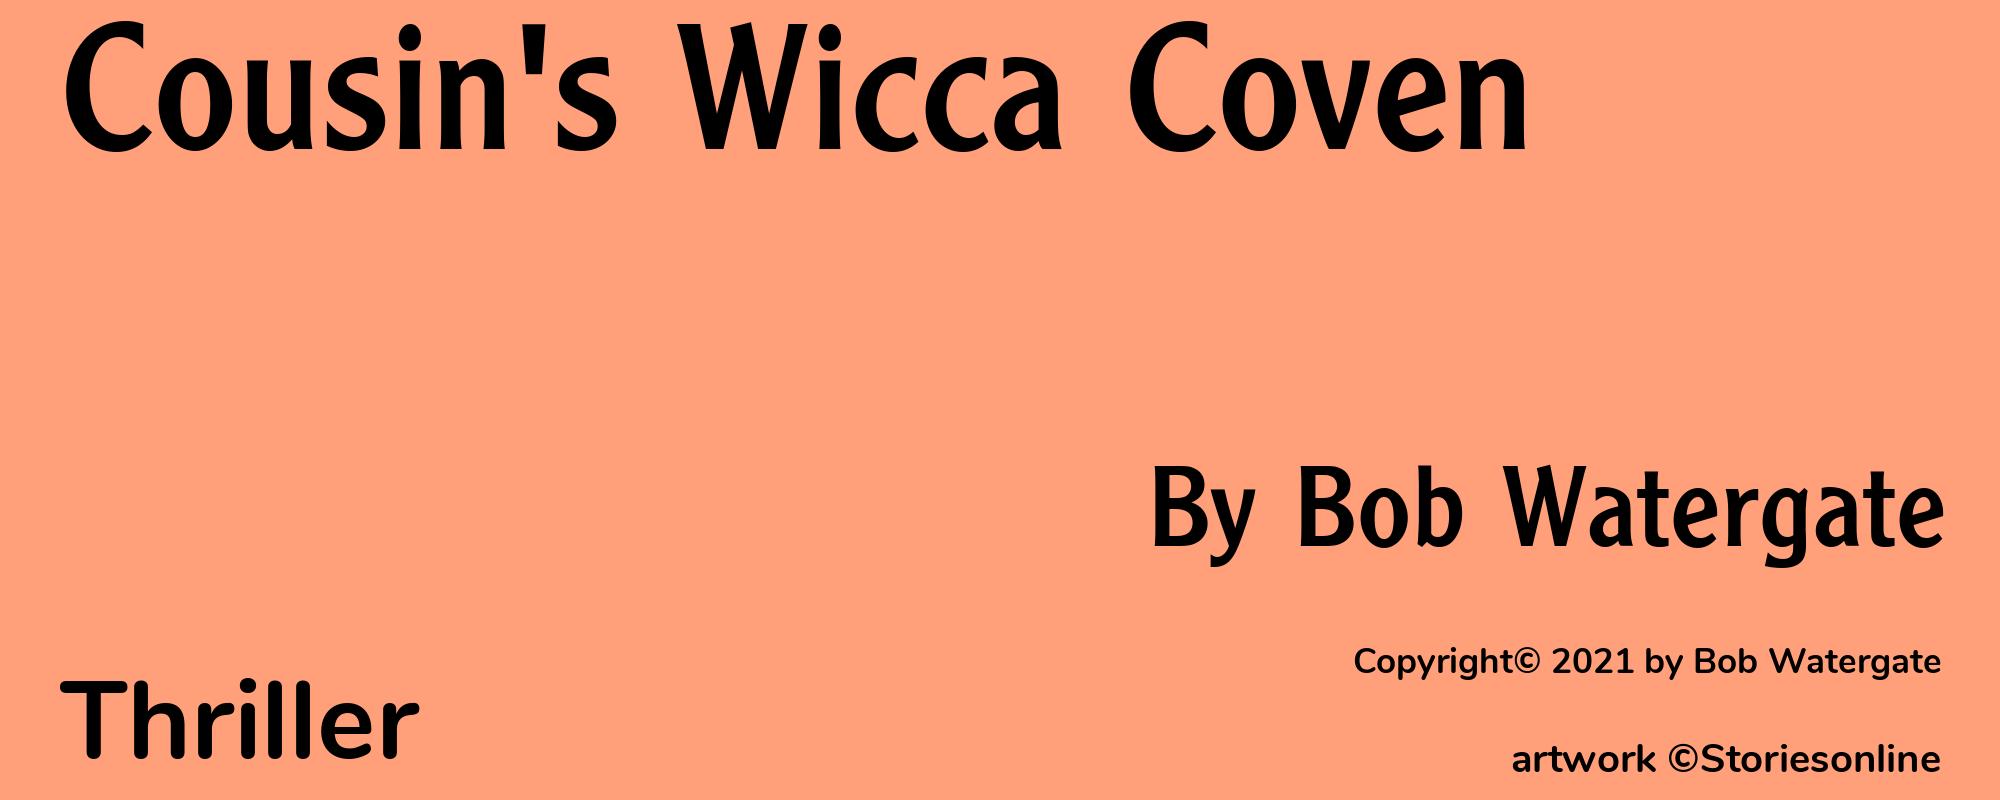 Cousin's Wicca Coven - Cover